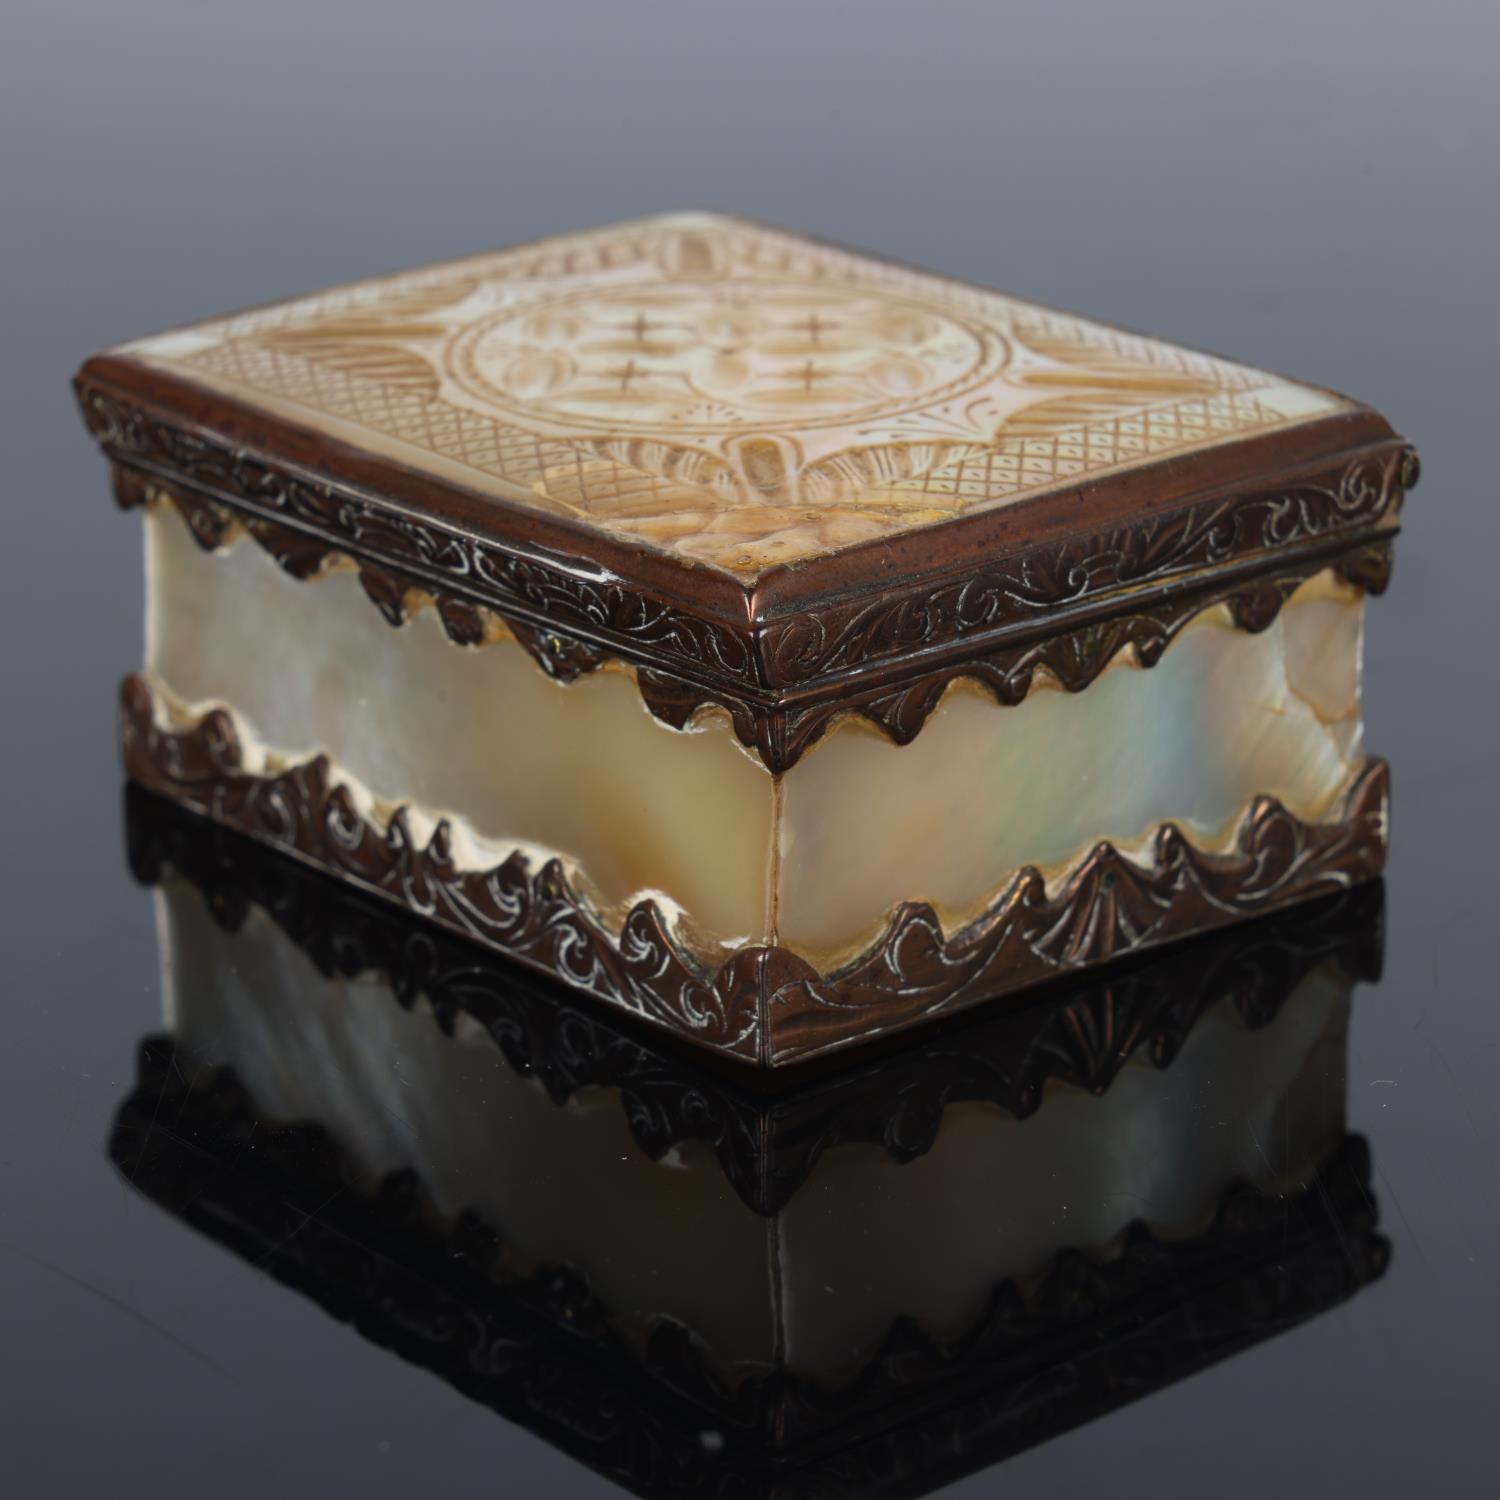 19th century mother-of-pearl and brass-mounted box, with carved lid, length 7.5cm Lid has an area of - Image 2 of 3